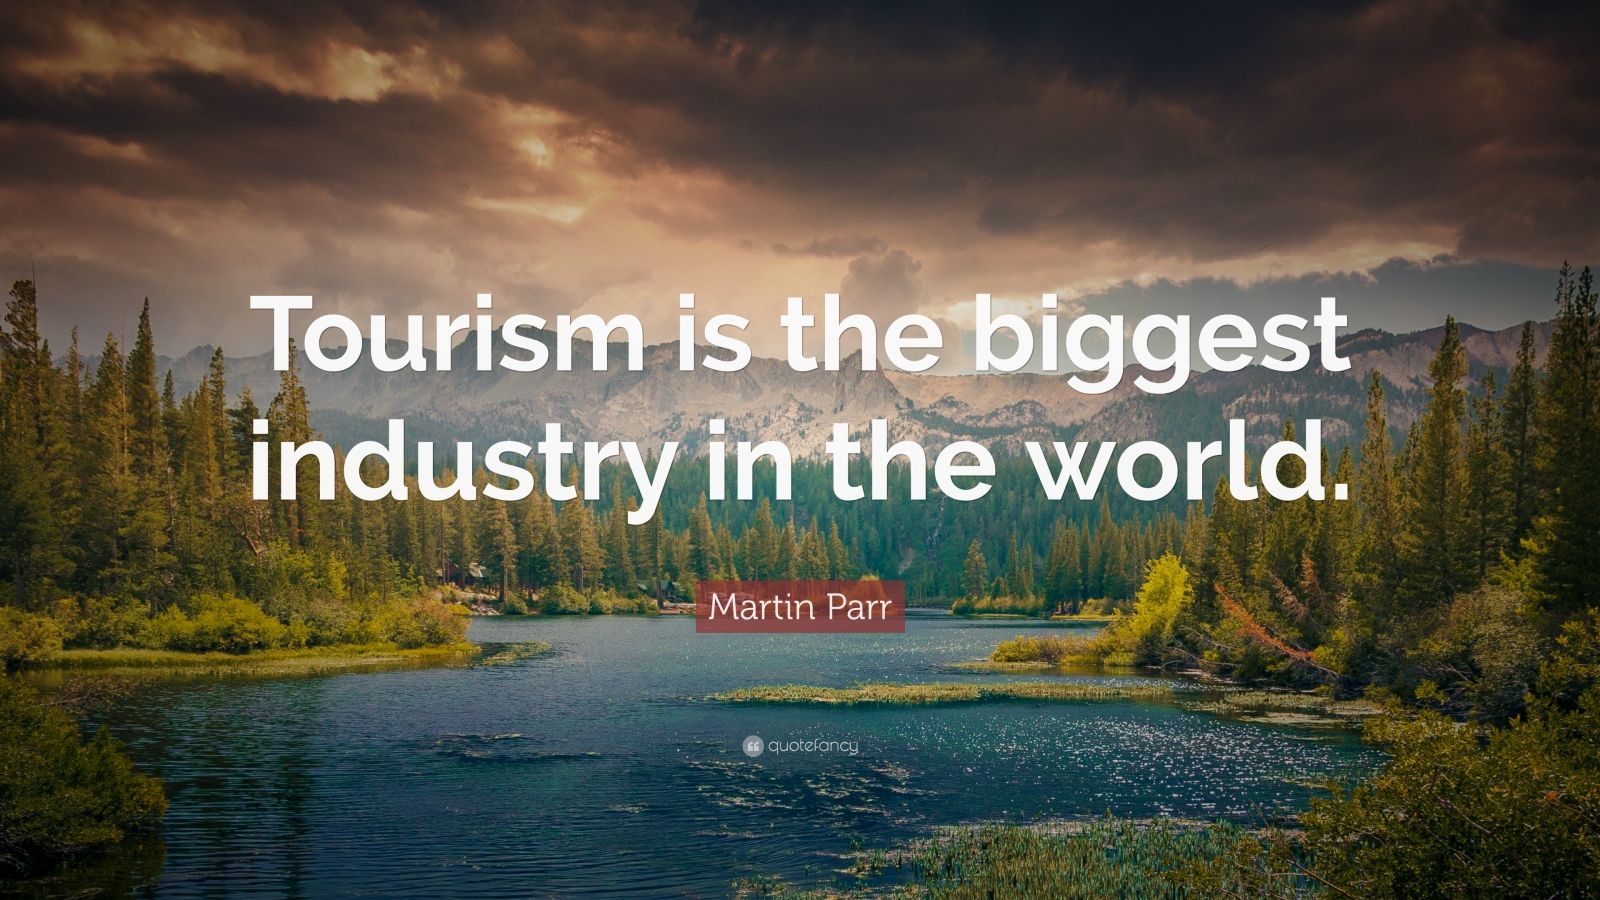 tourism is big business